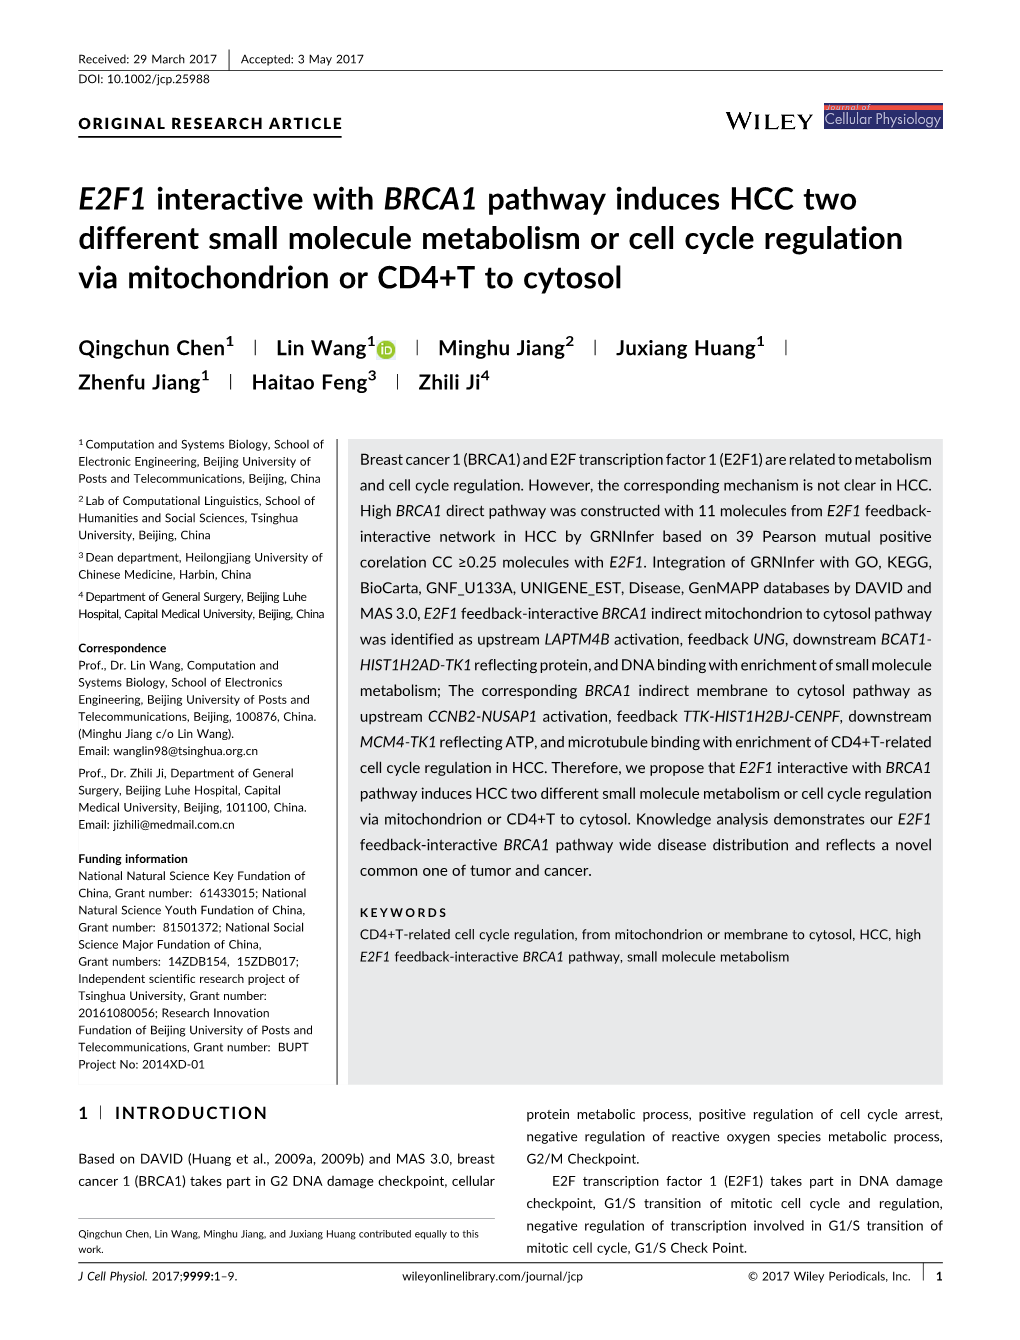 E2F1 Interactive with BRCA1 Pathway Induces HCC Two Different Small Molecule Metabolism Or Cell Cycle Regulation Via Mitochondrion Or CD4+T to Cytosol